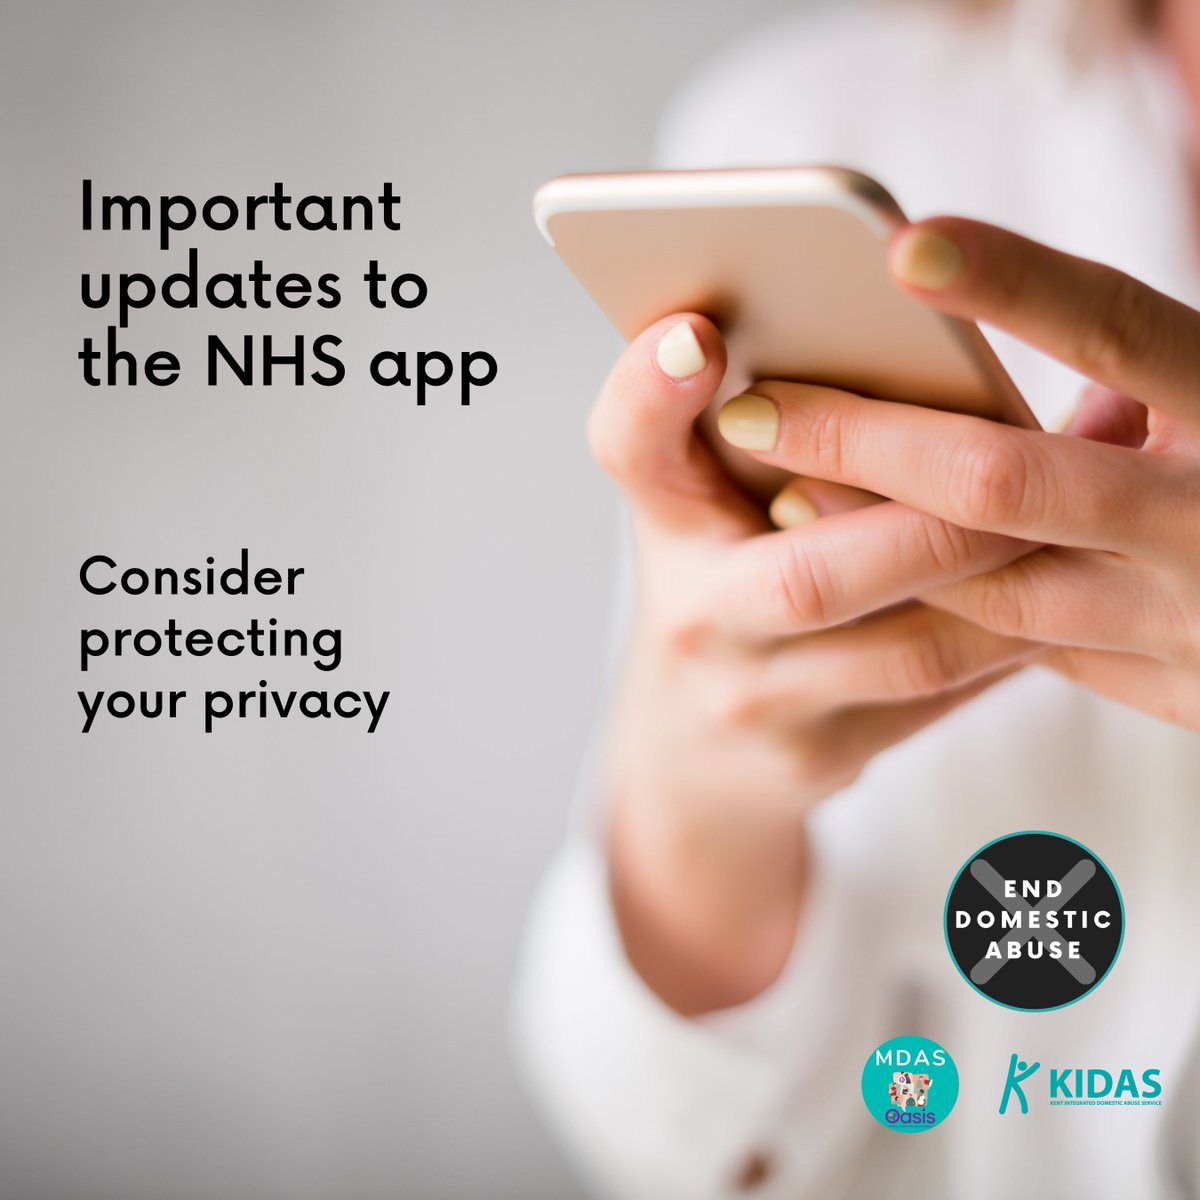 From today, Tues 1 Nov, your GP health records will automatically be made available through the NHS app. If you're worried about your privacy/someone accessing your phone/forcing you to show them - contact your GP to request removal or consider deleting the app

#KnowSeeSpeakOut